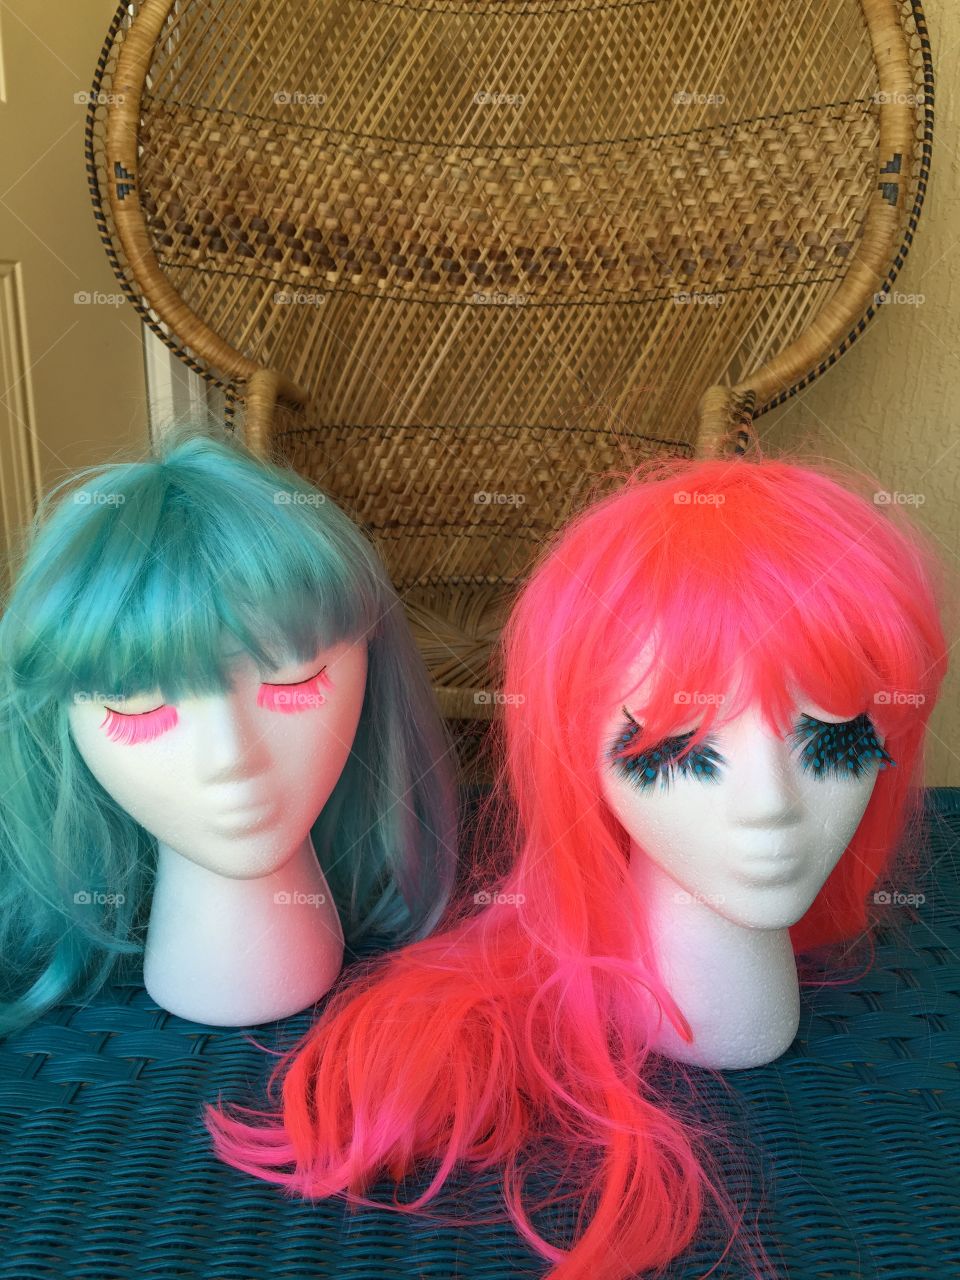 Neon wigs. Neon wigs. Bright colored wigs on mannequins. 